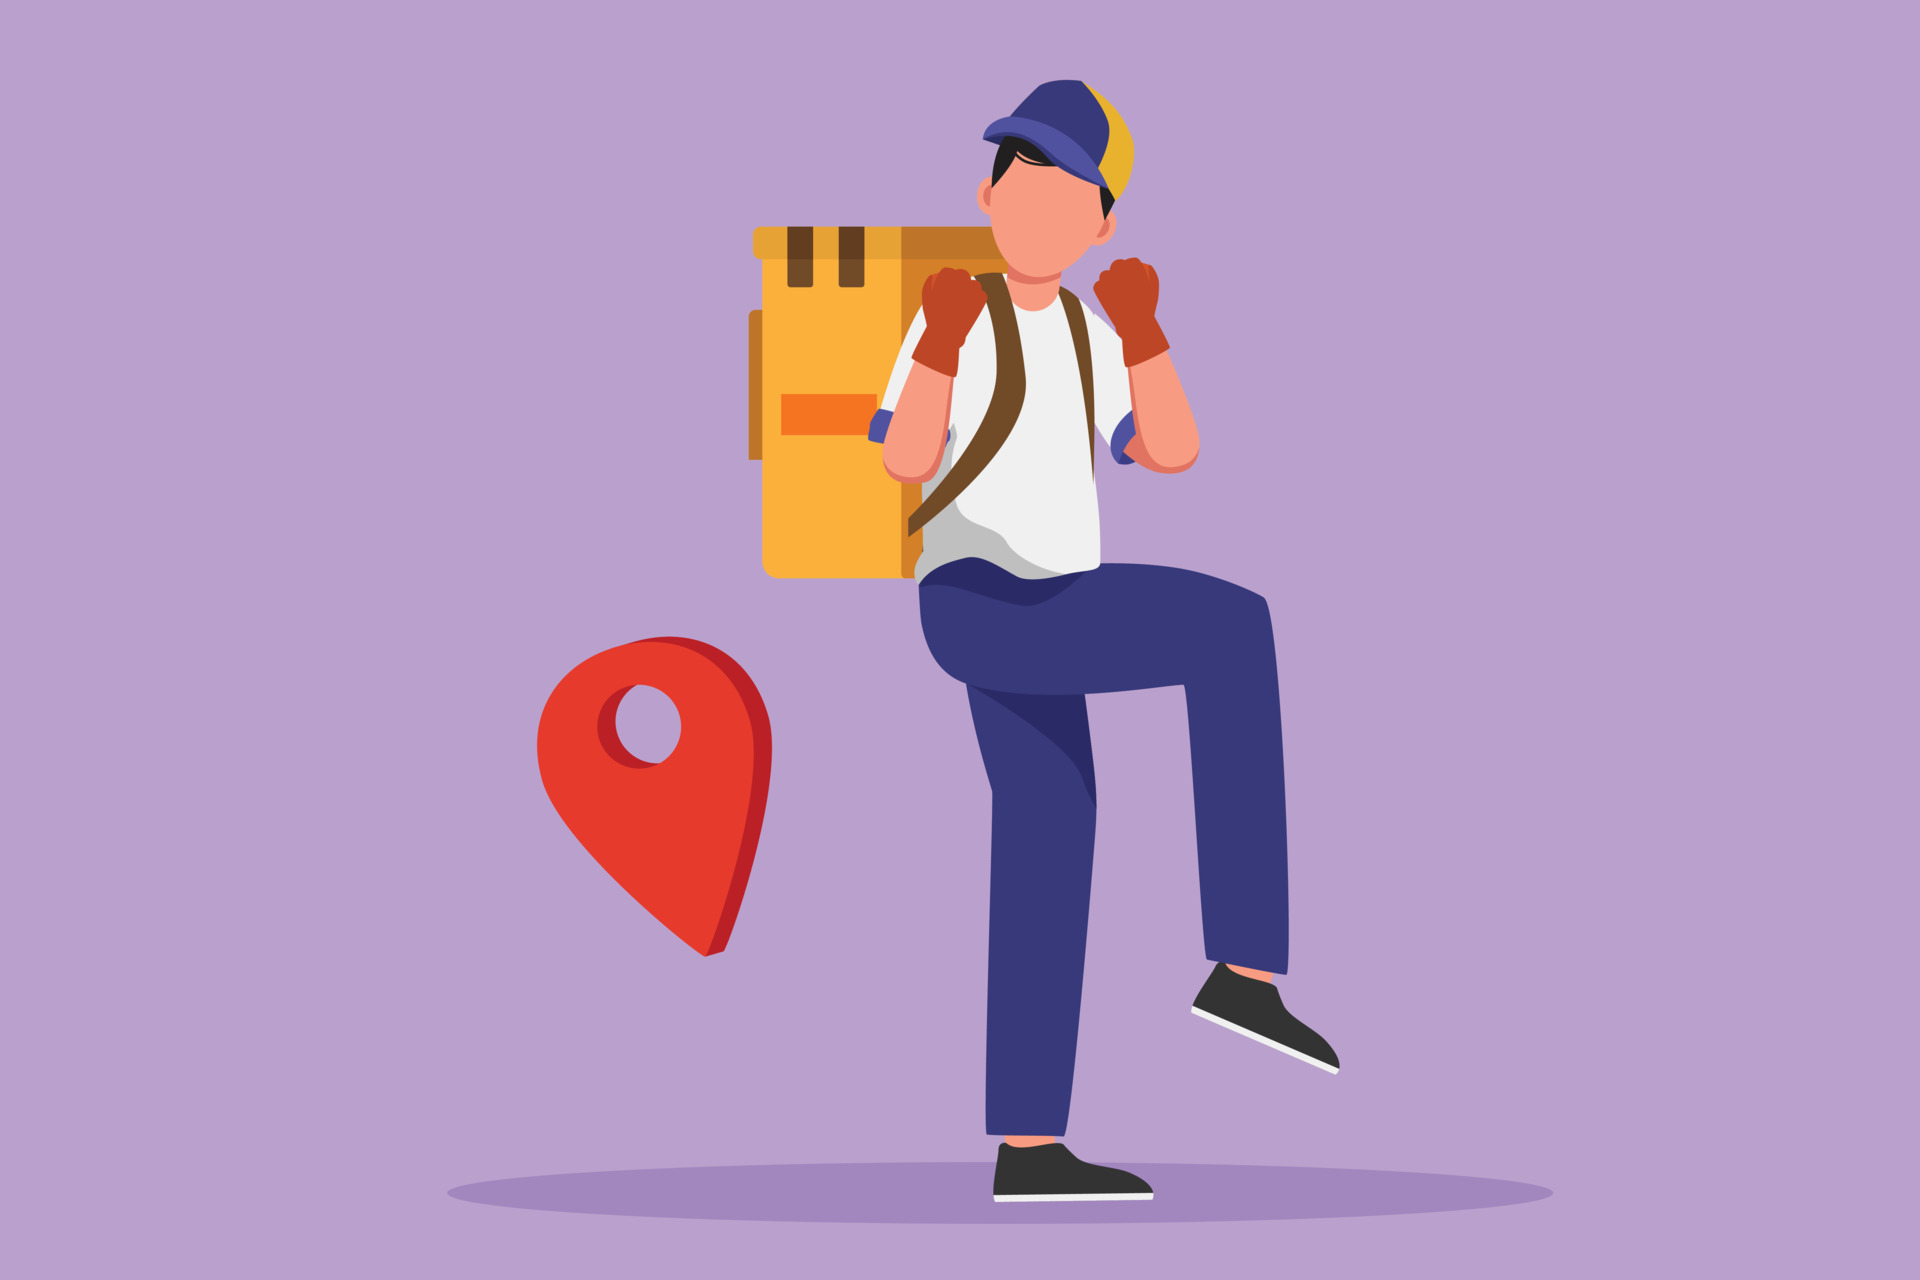 Graphic flat design drawing happy deliveryman standing with celebrate  gesture and pin map icon. Carrying package box that customer has ordered to  be delivered safely. Cartoon style vector illustration 19133729 Vector Art